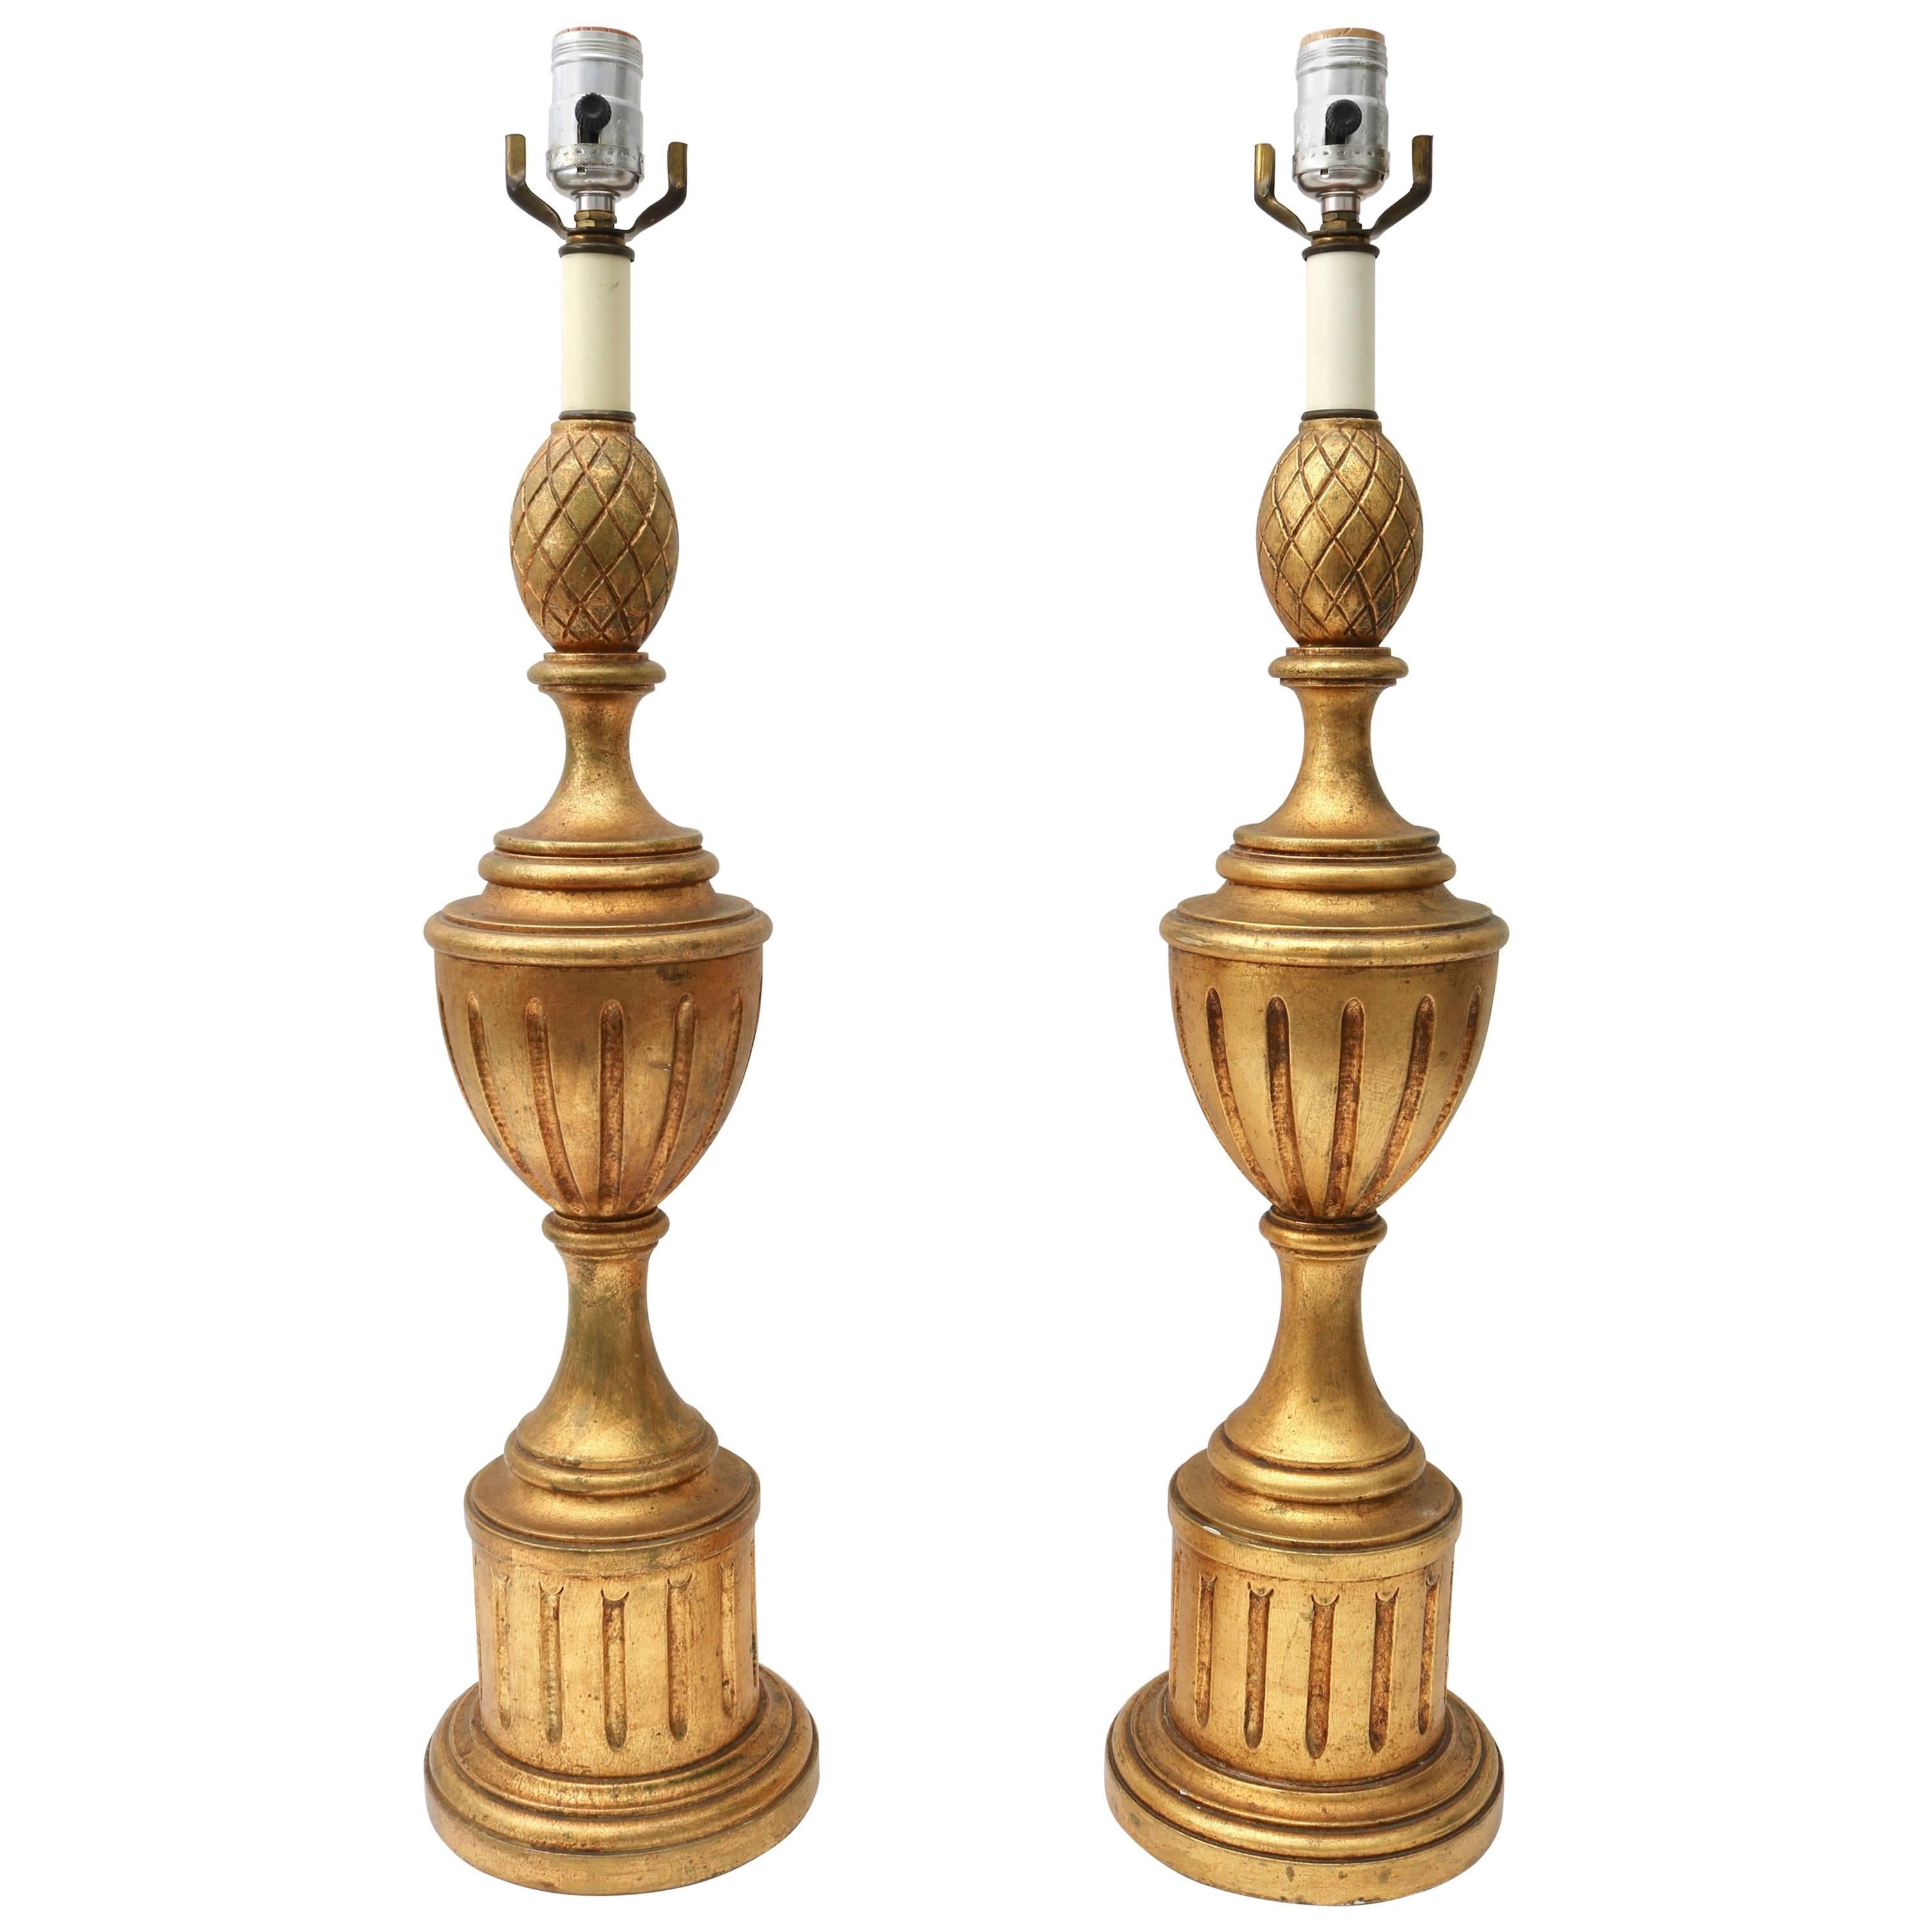 Pair of Louis XVI Style Urn-Form Table Lamps in a Bright, Antique Gold Finish